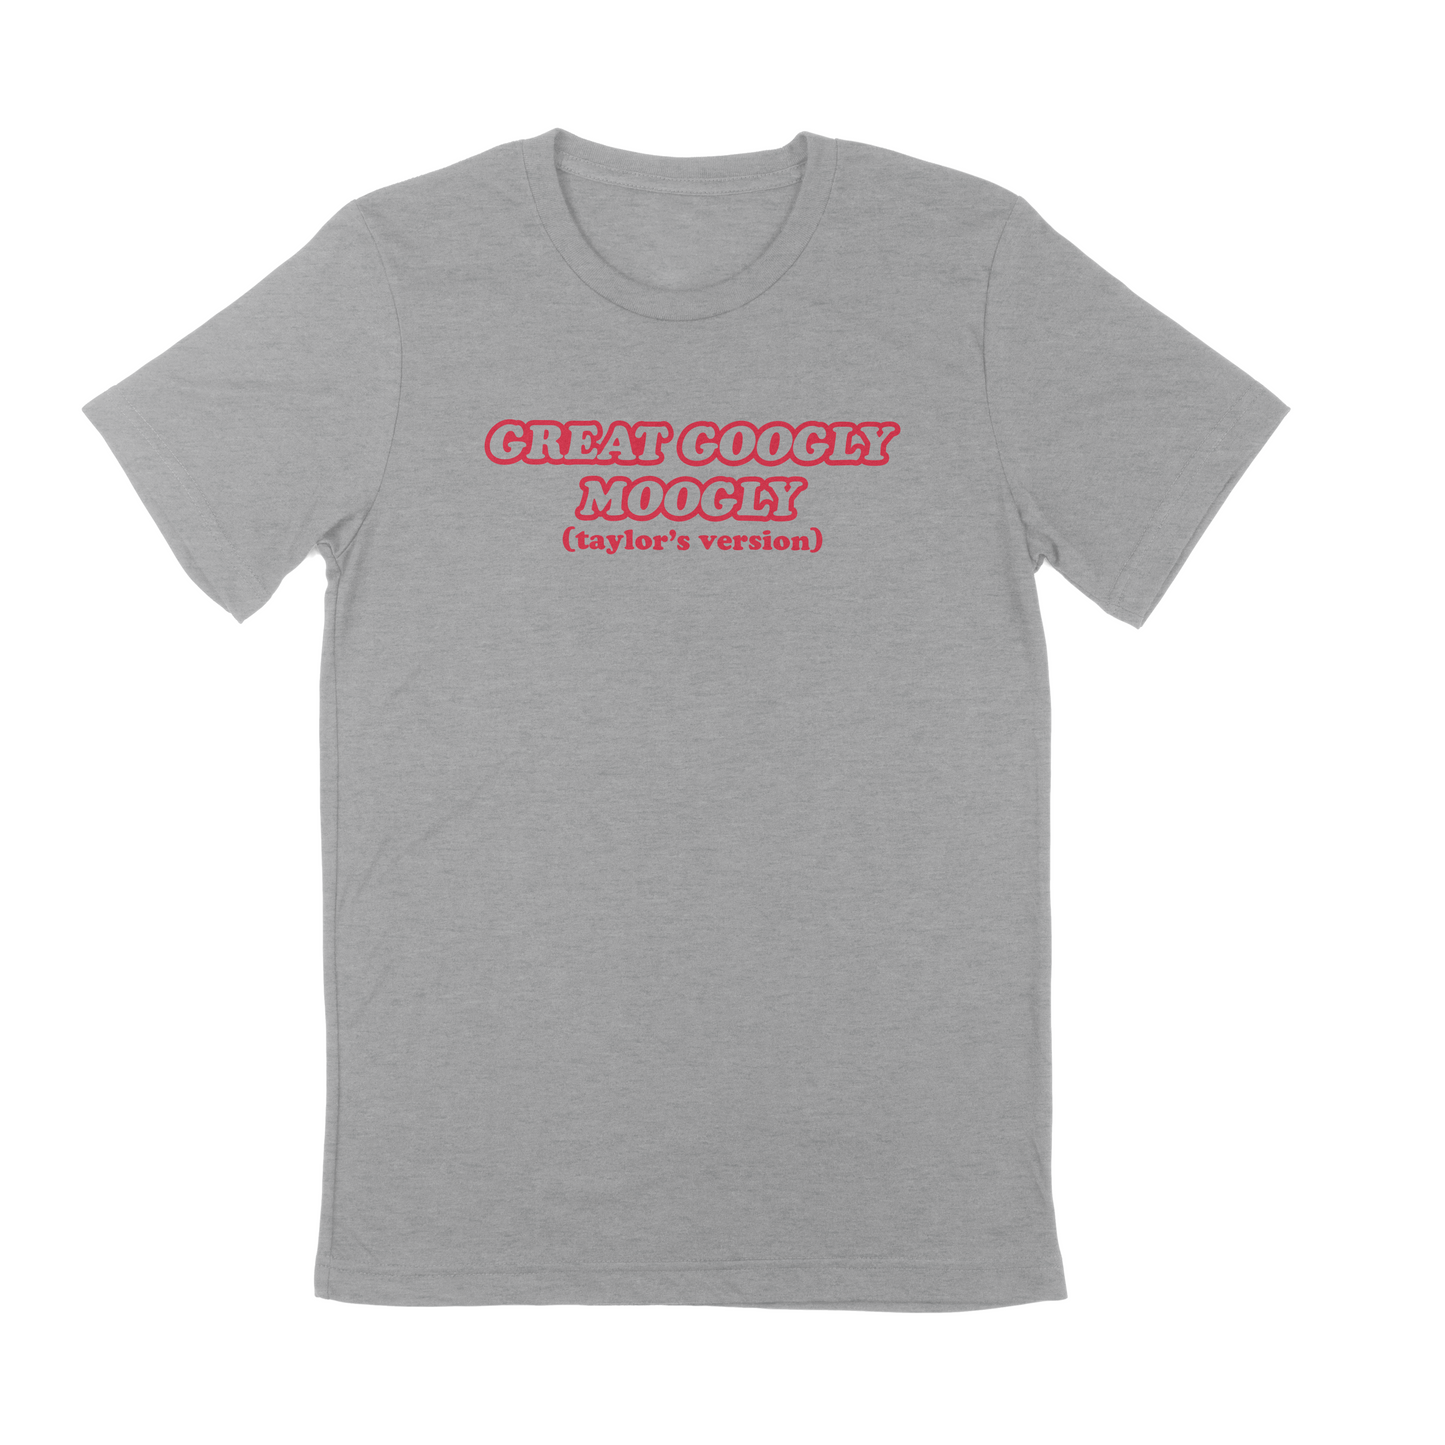 Great Googly Moogly -- Taylor's Version Adult Tee